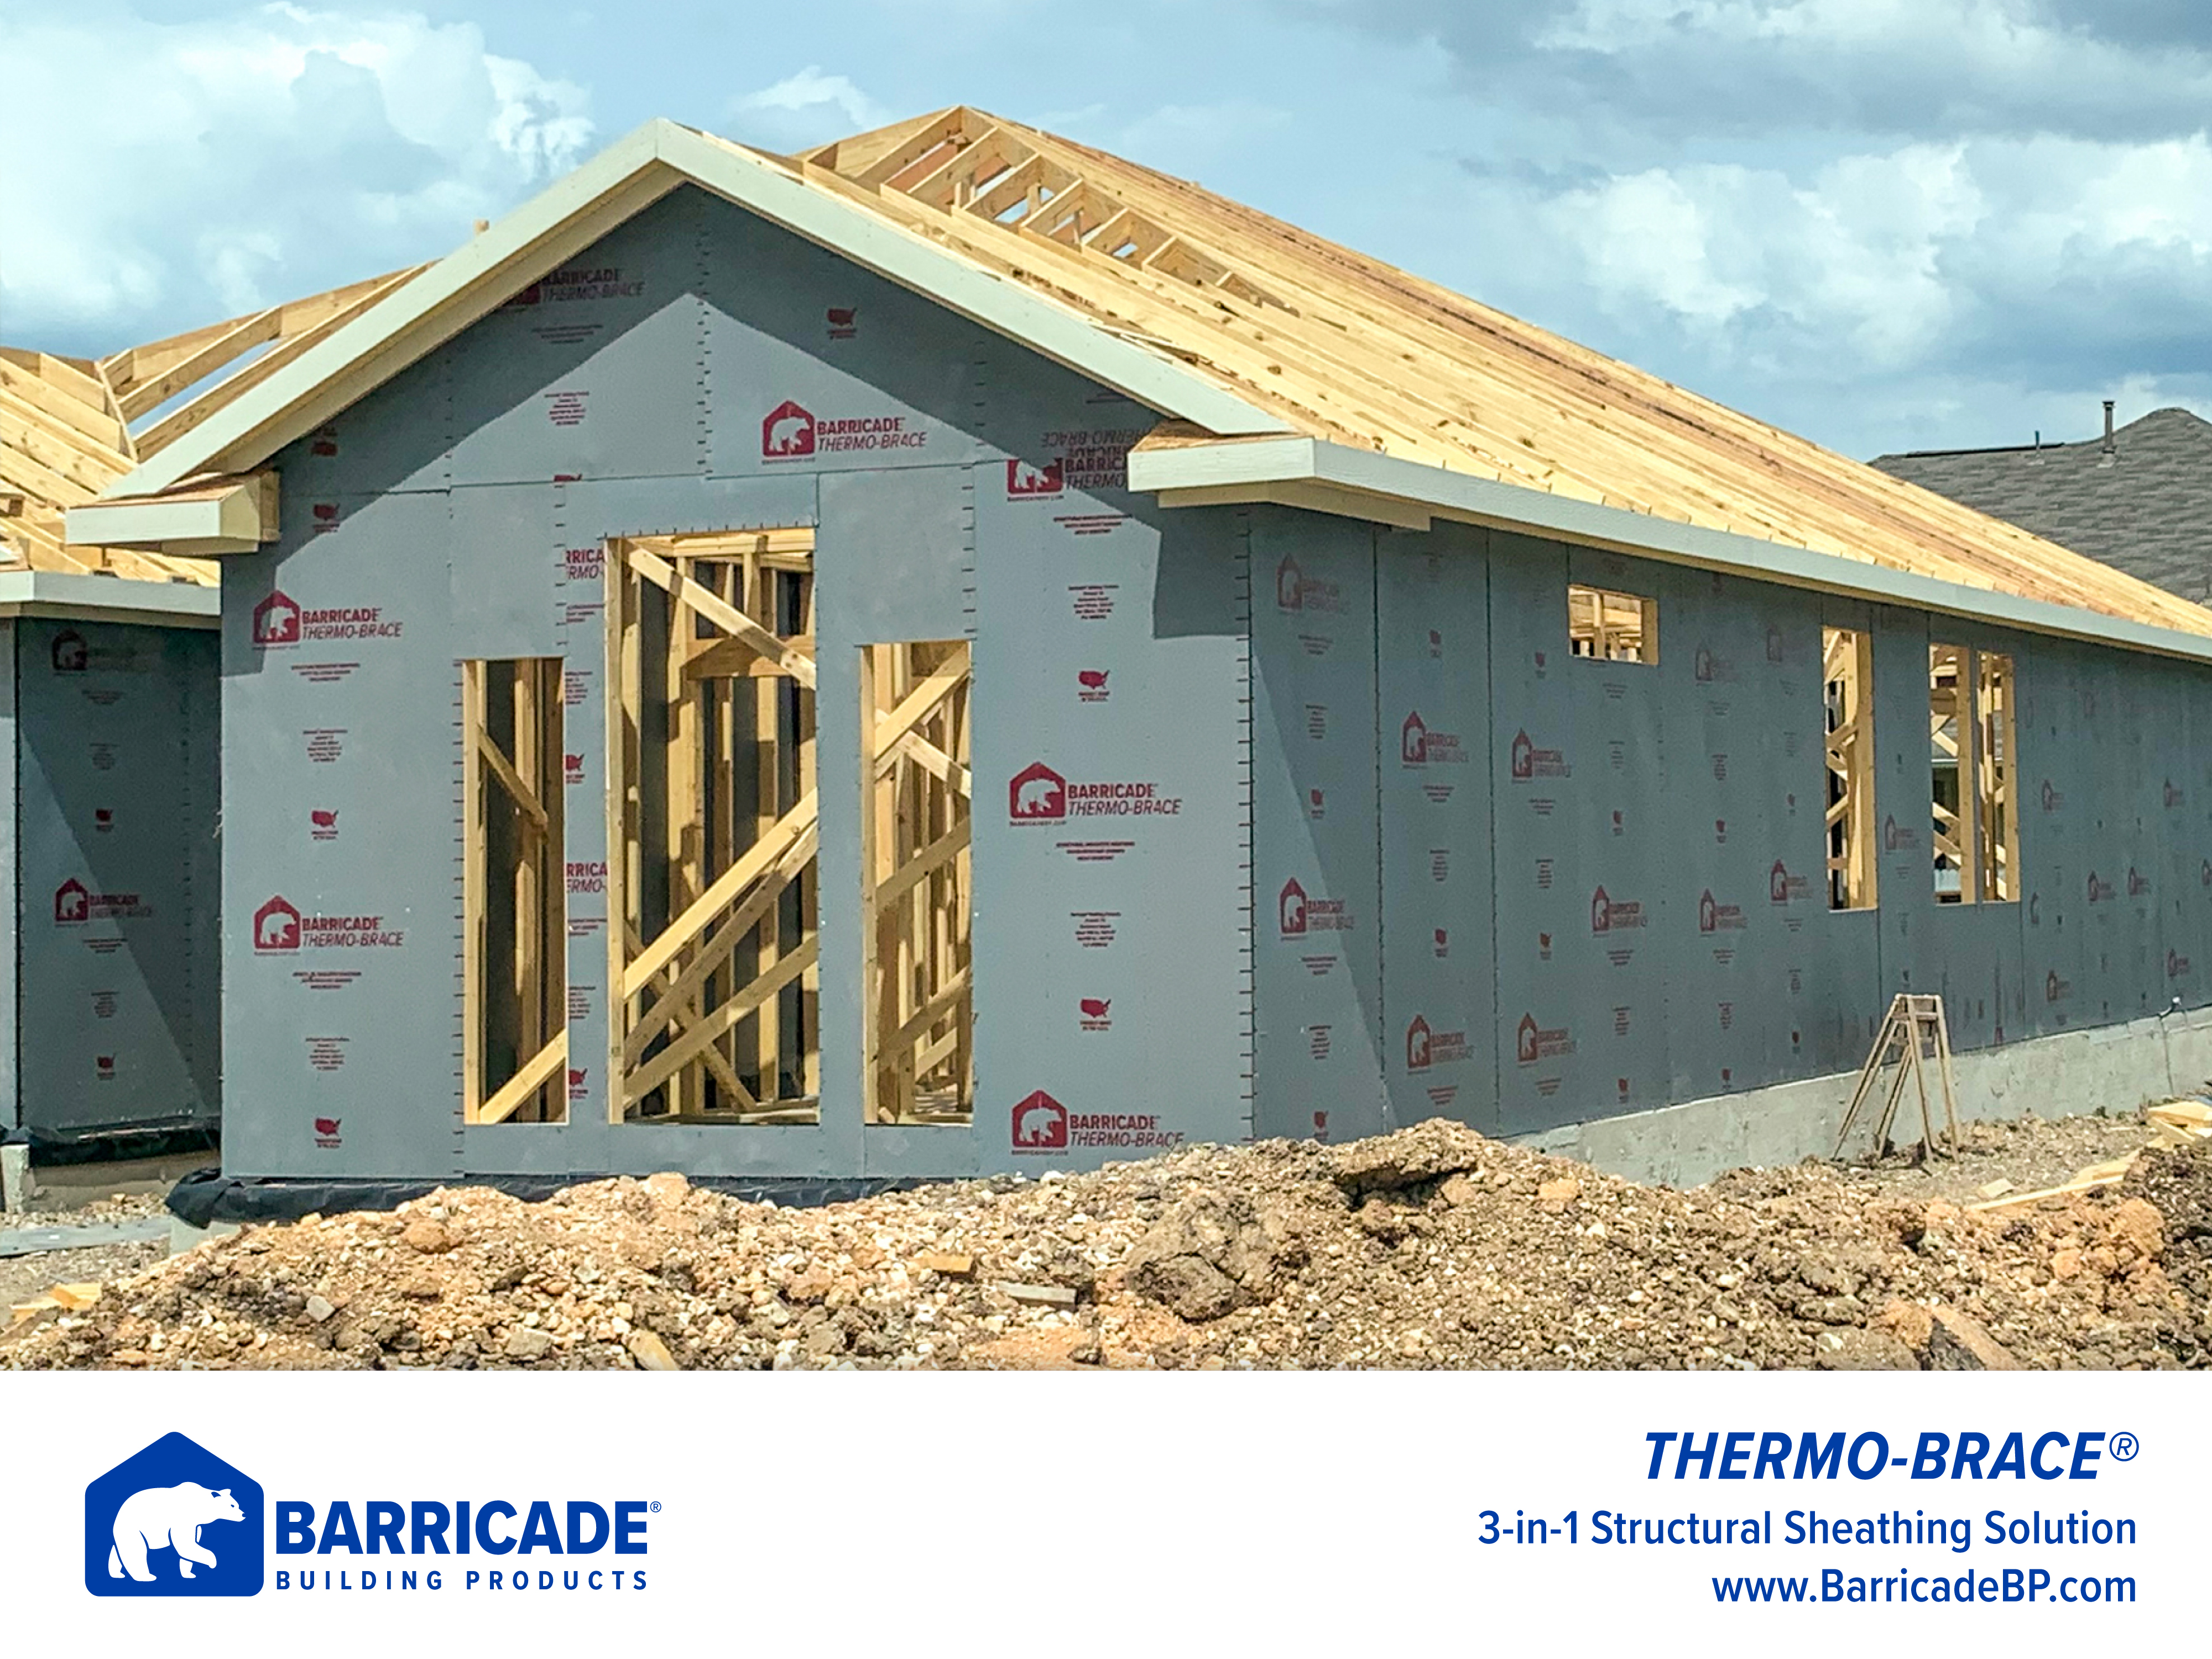 Barricade Thermo-Brace 3-in-1 structural sheathing being used on a jobsite.